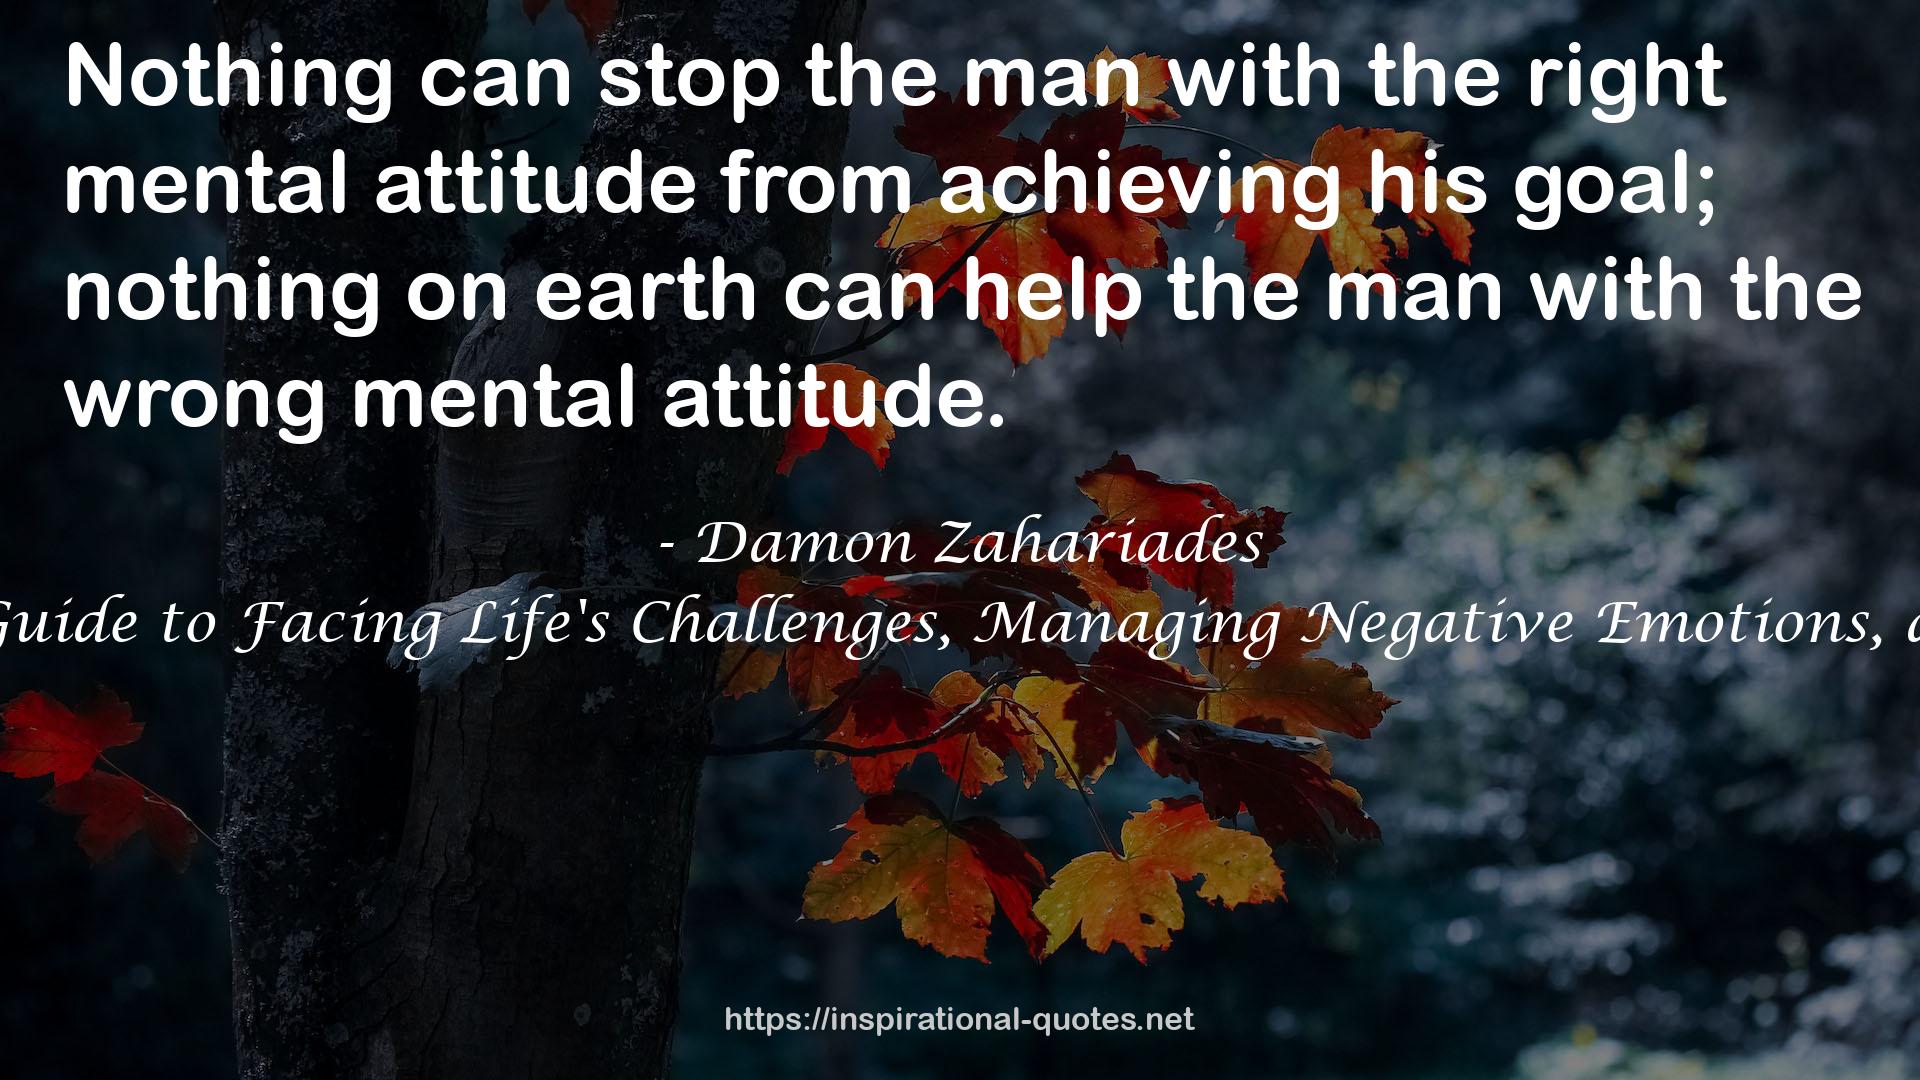 The Mental Toughness Handbook: A Step-By-Step Guide to Facing Life's Challenges, Managing Negative Emotions, and Overcoming Adversity with Courage and Poise QUOTES